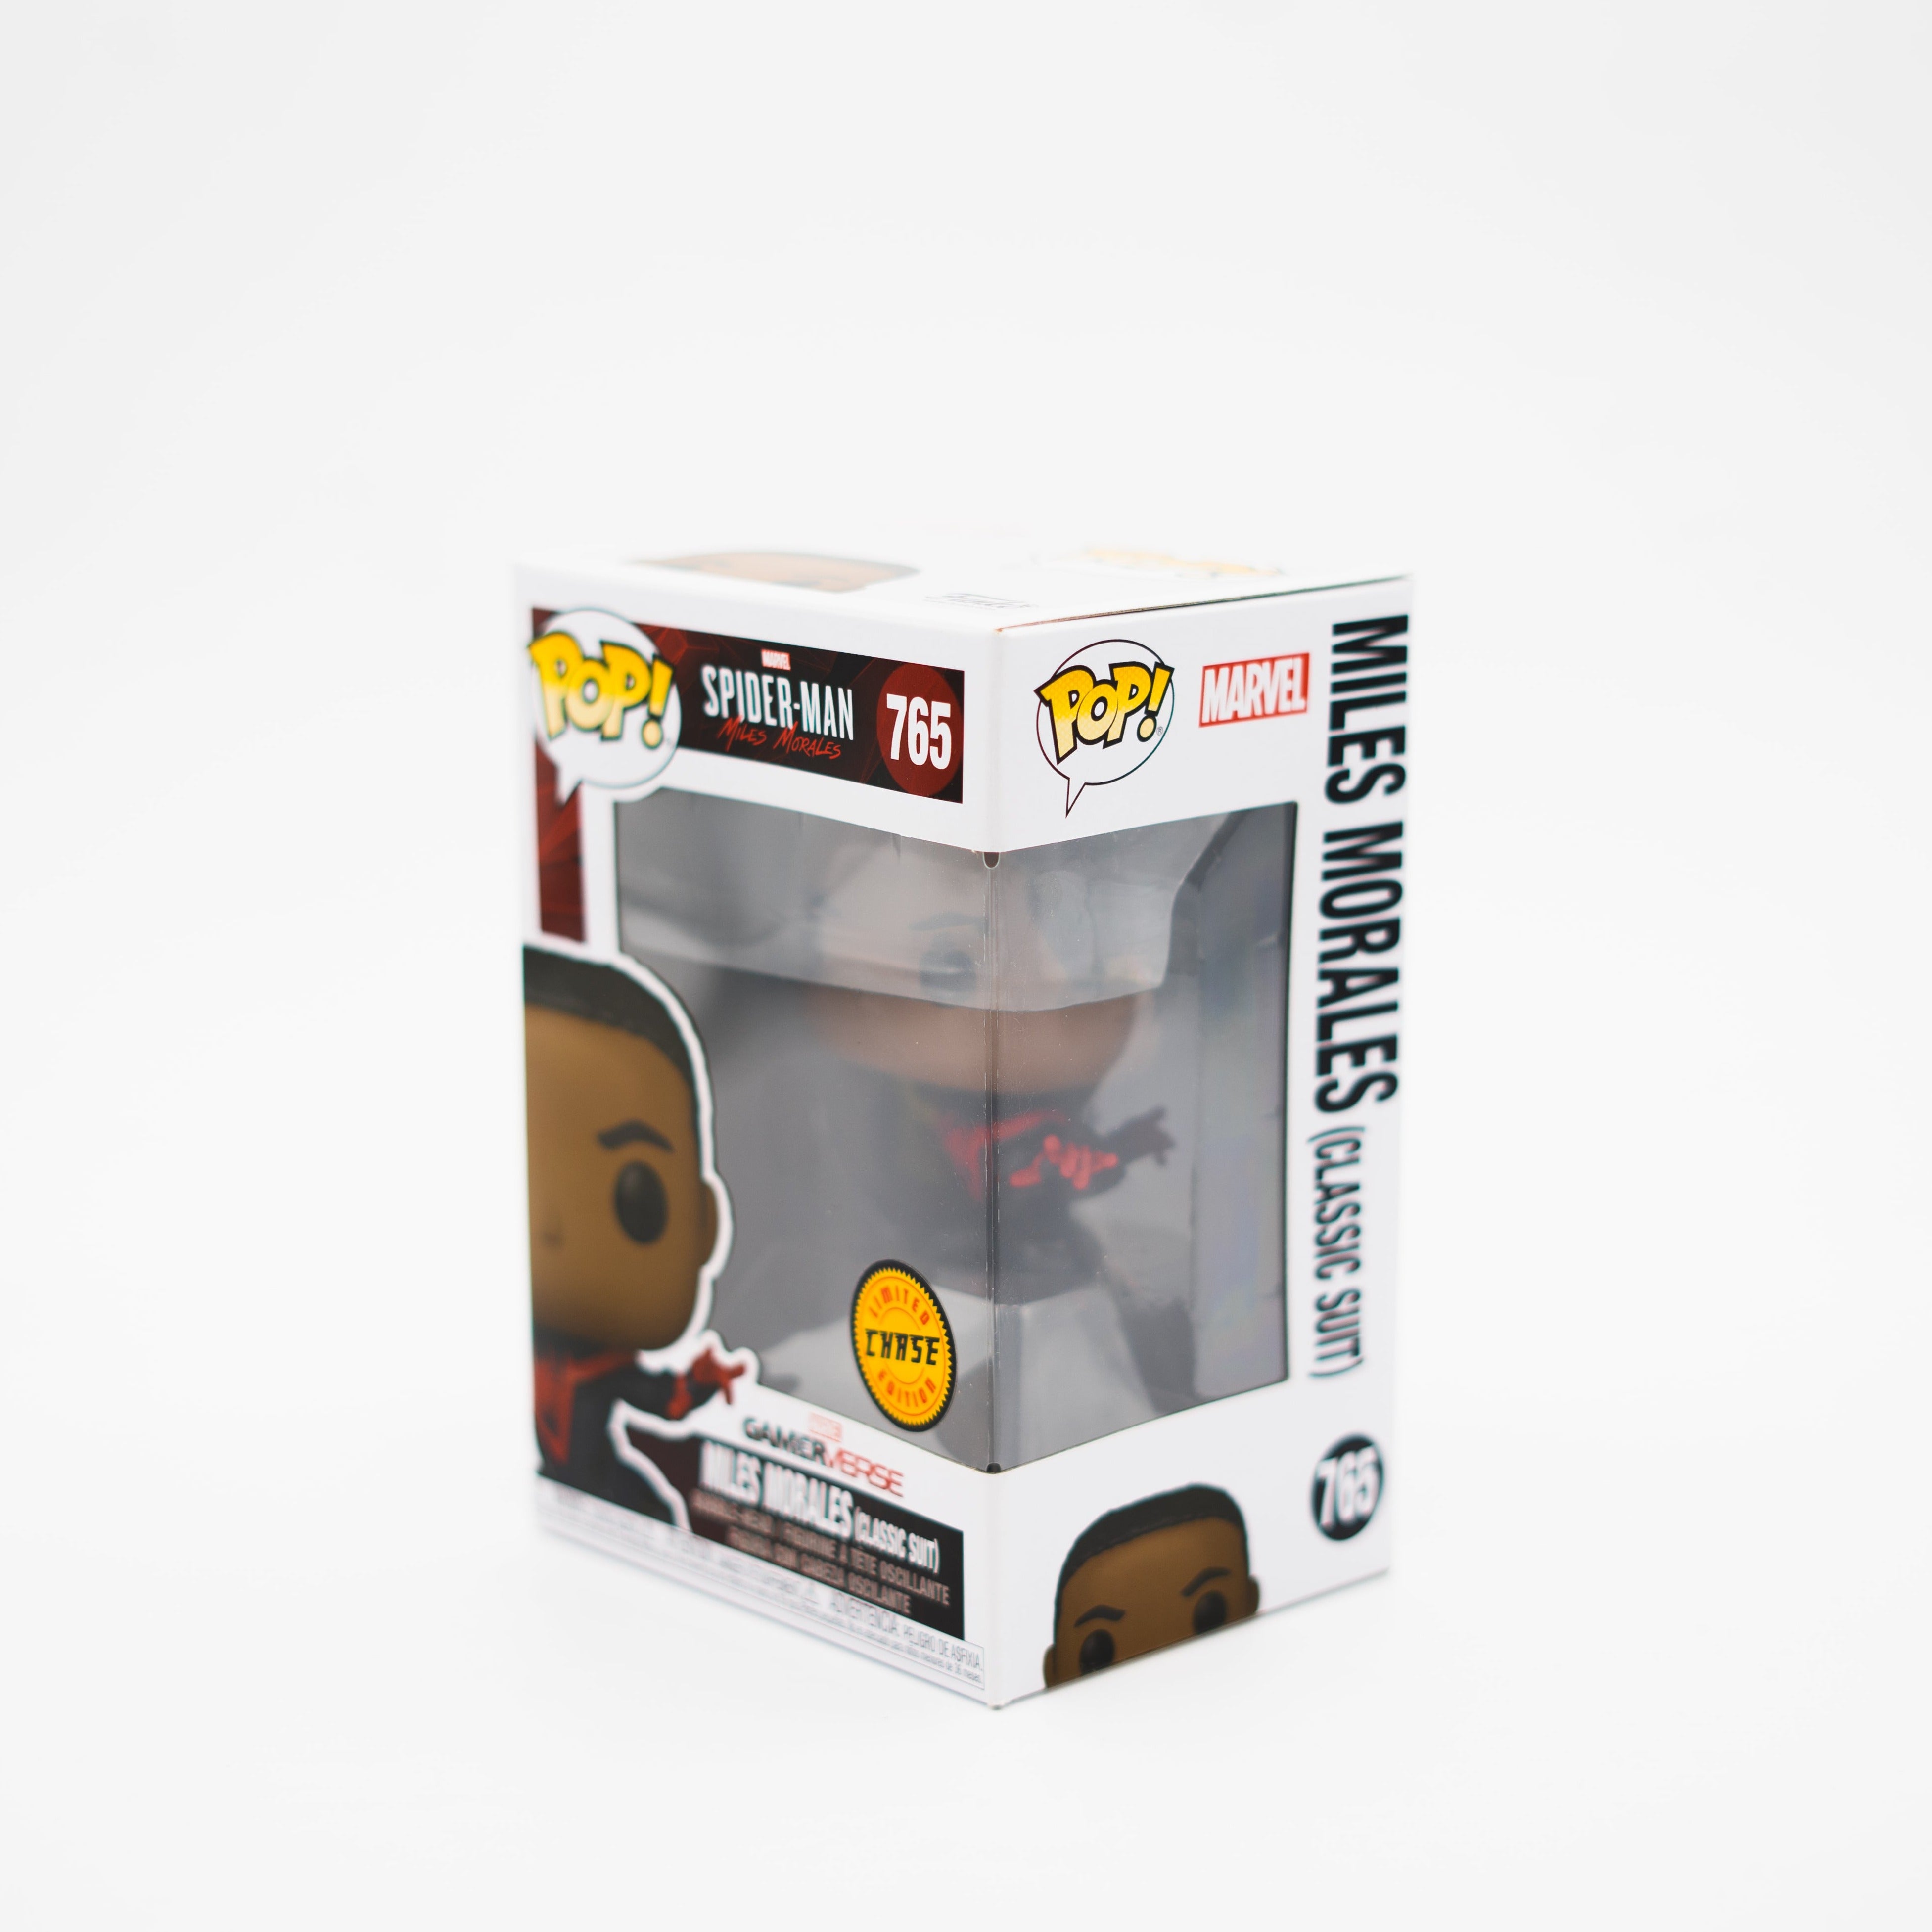 Funko Pop! Miles Morales CHASE classic suit #765 CHASE